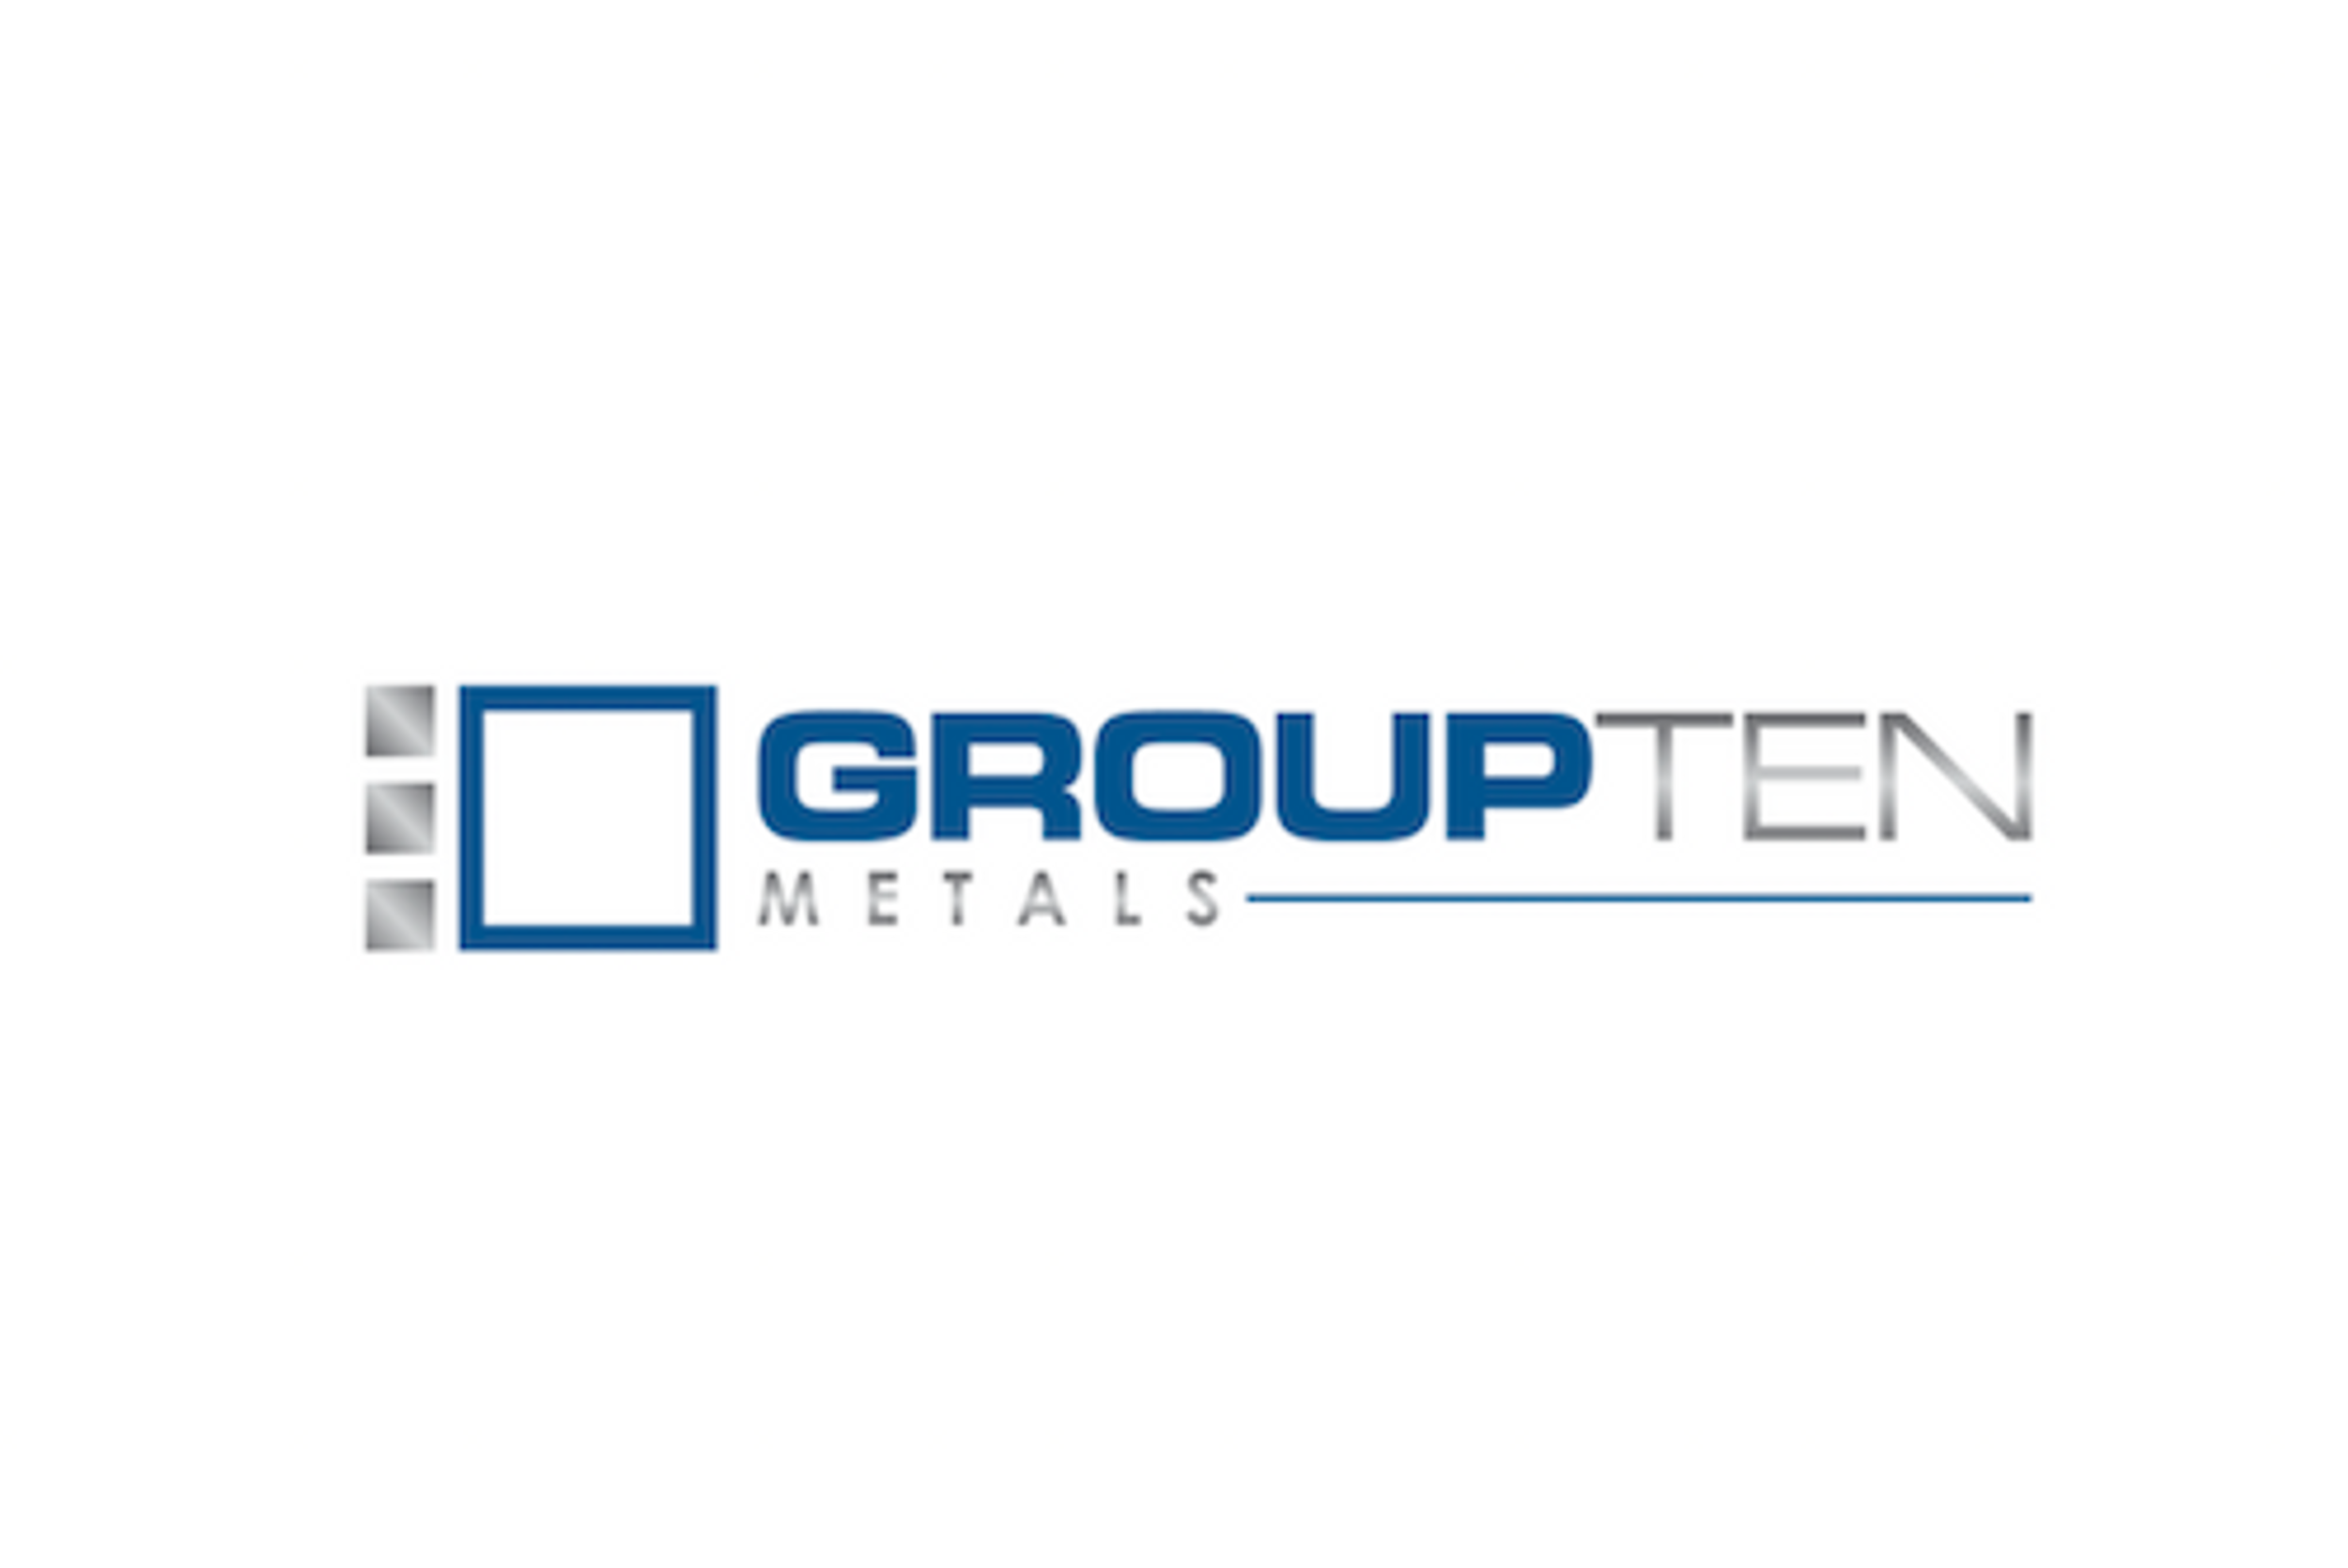 Ellis Martin Report: Group Ten Metals  Adds Strong New Team Members and Reports High Grade Intervals of Nickel Sulphide at Stillwater West in Montana.